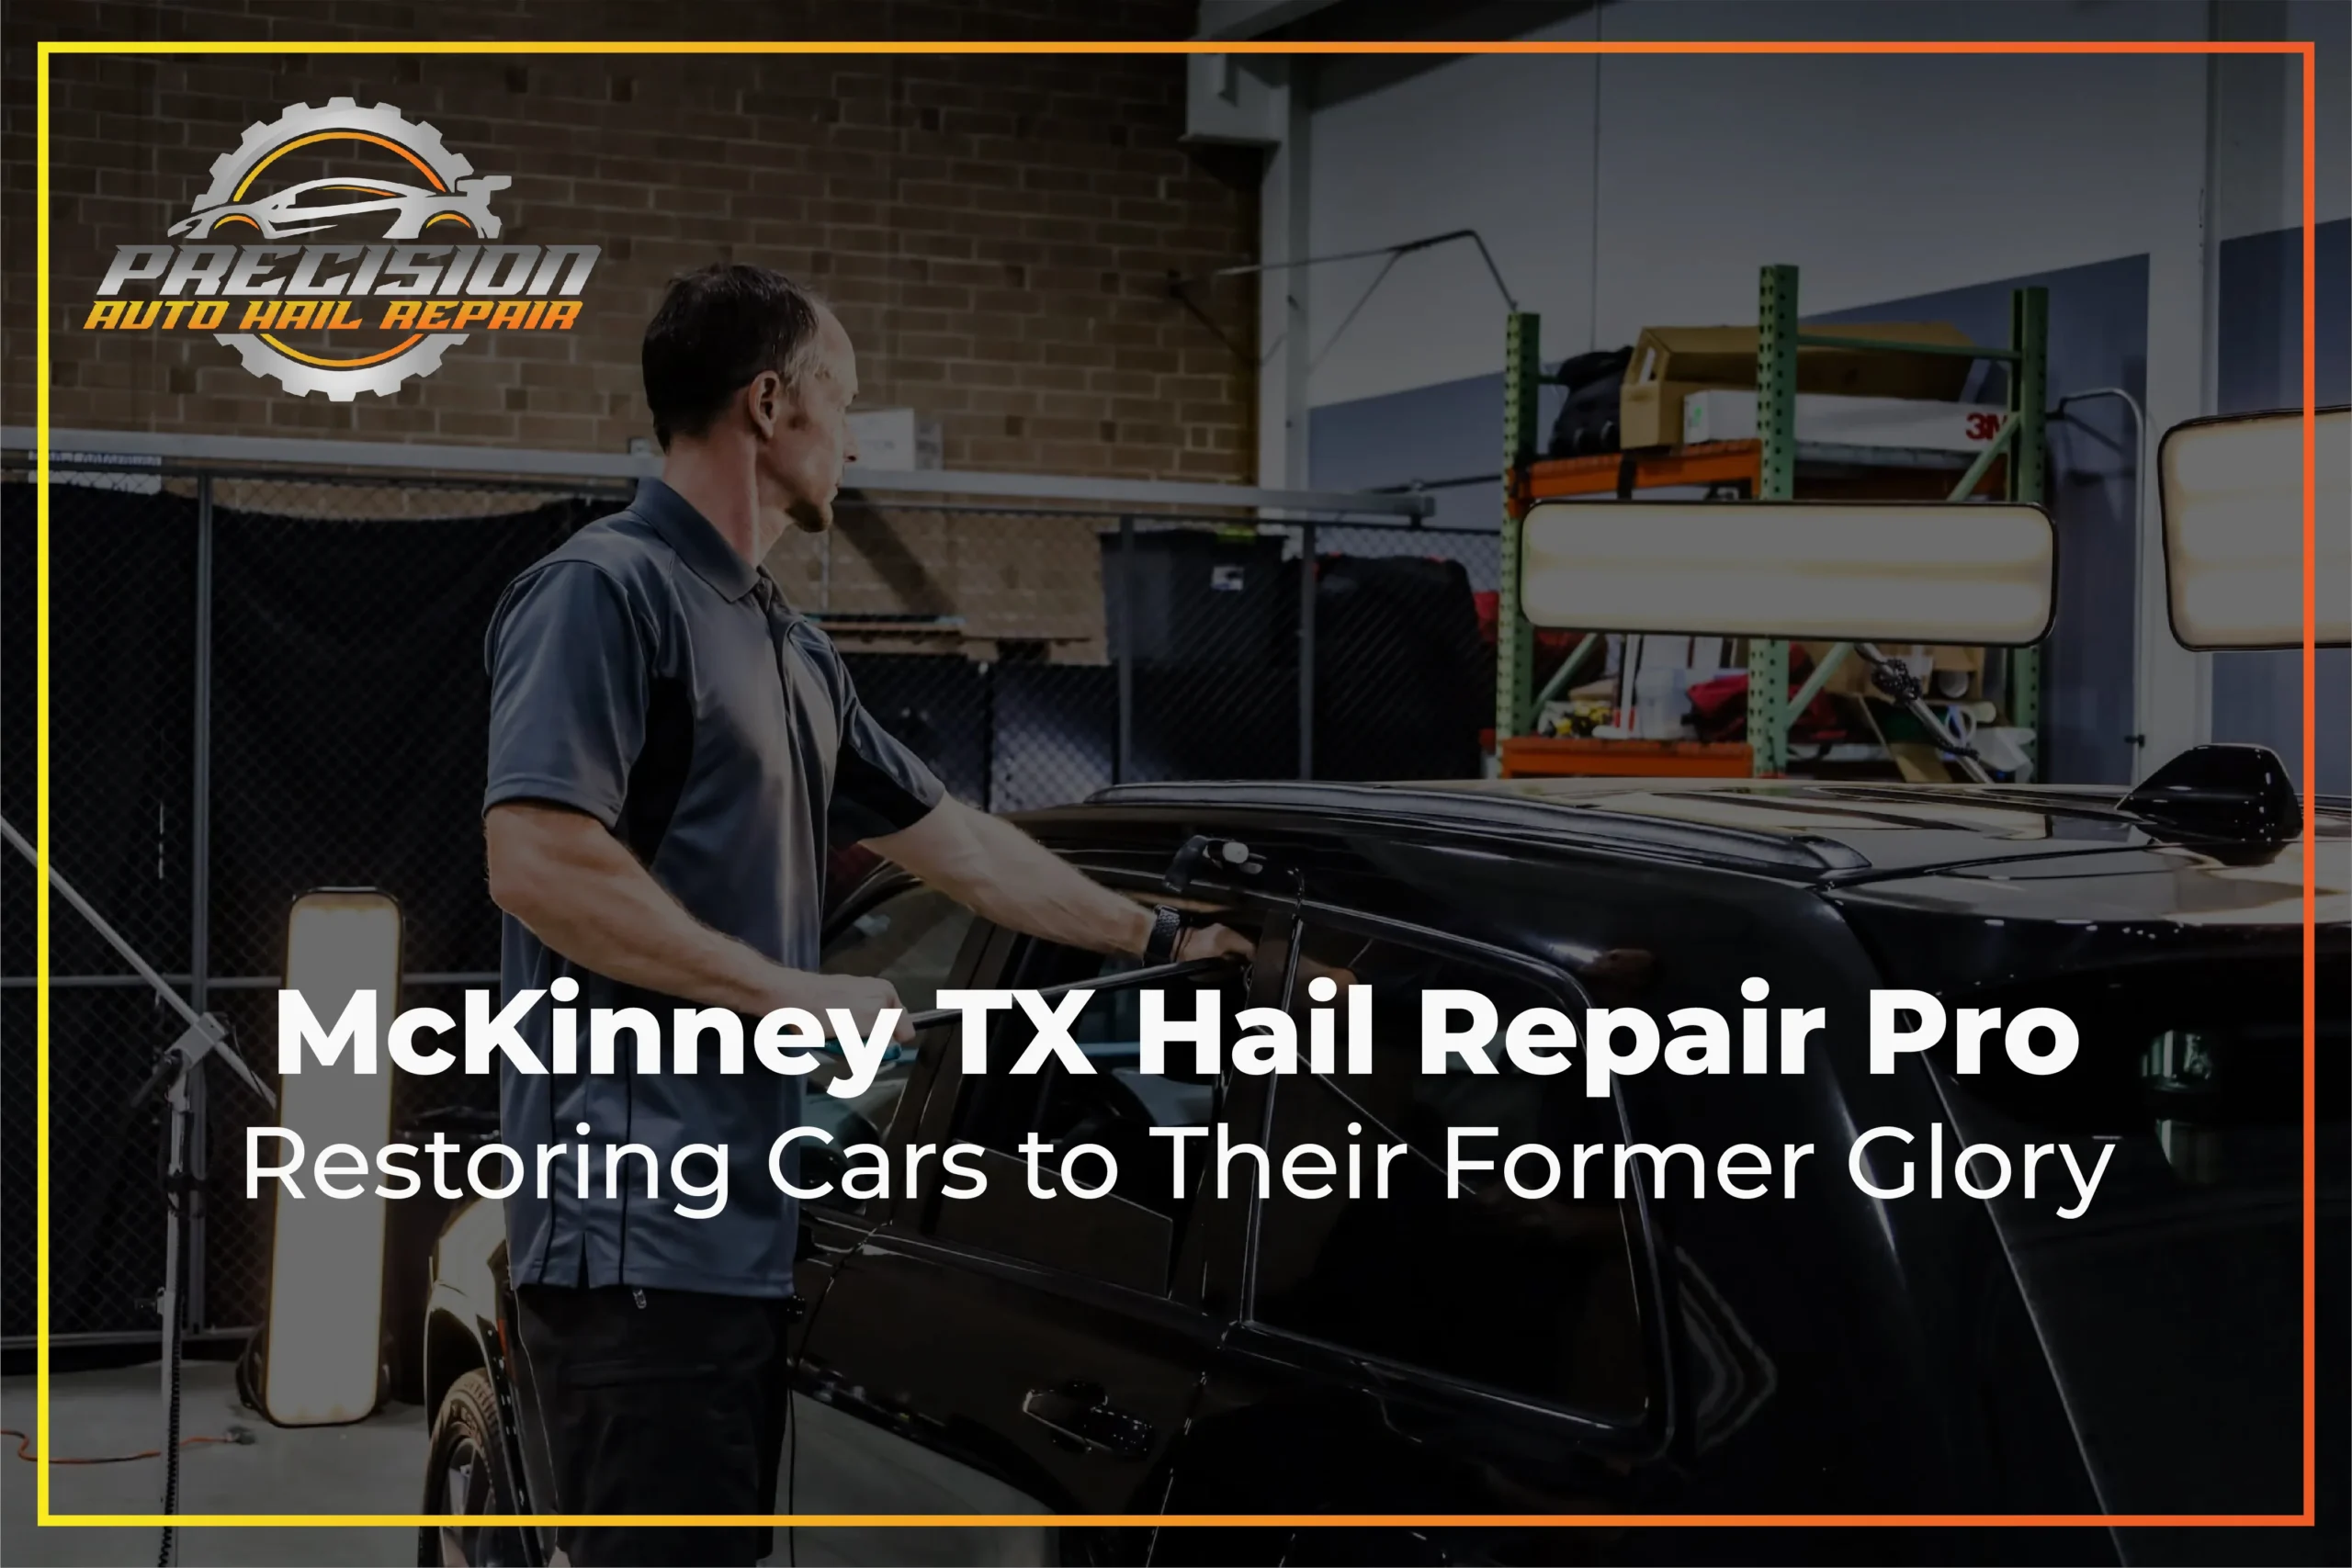 Restoring Cars to Their Former Glory